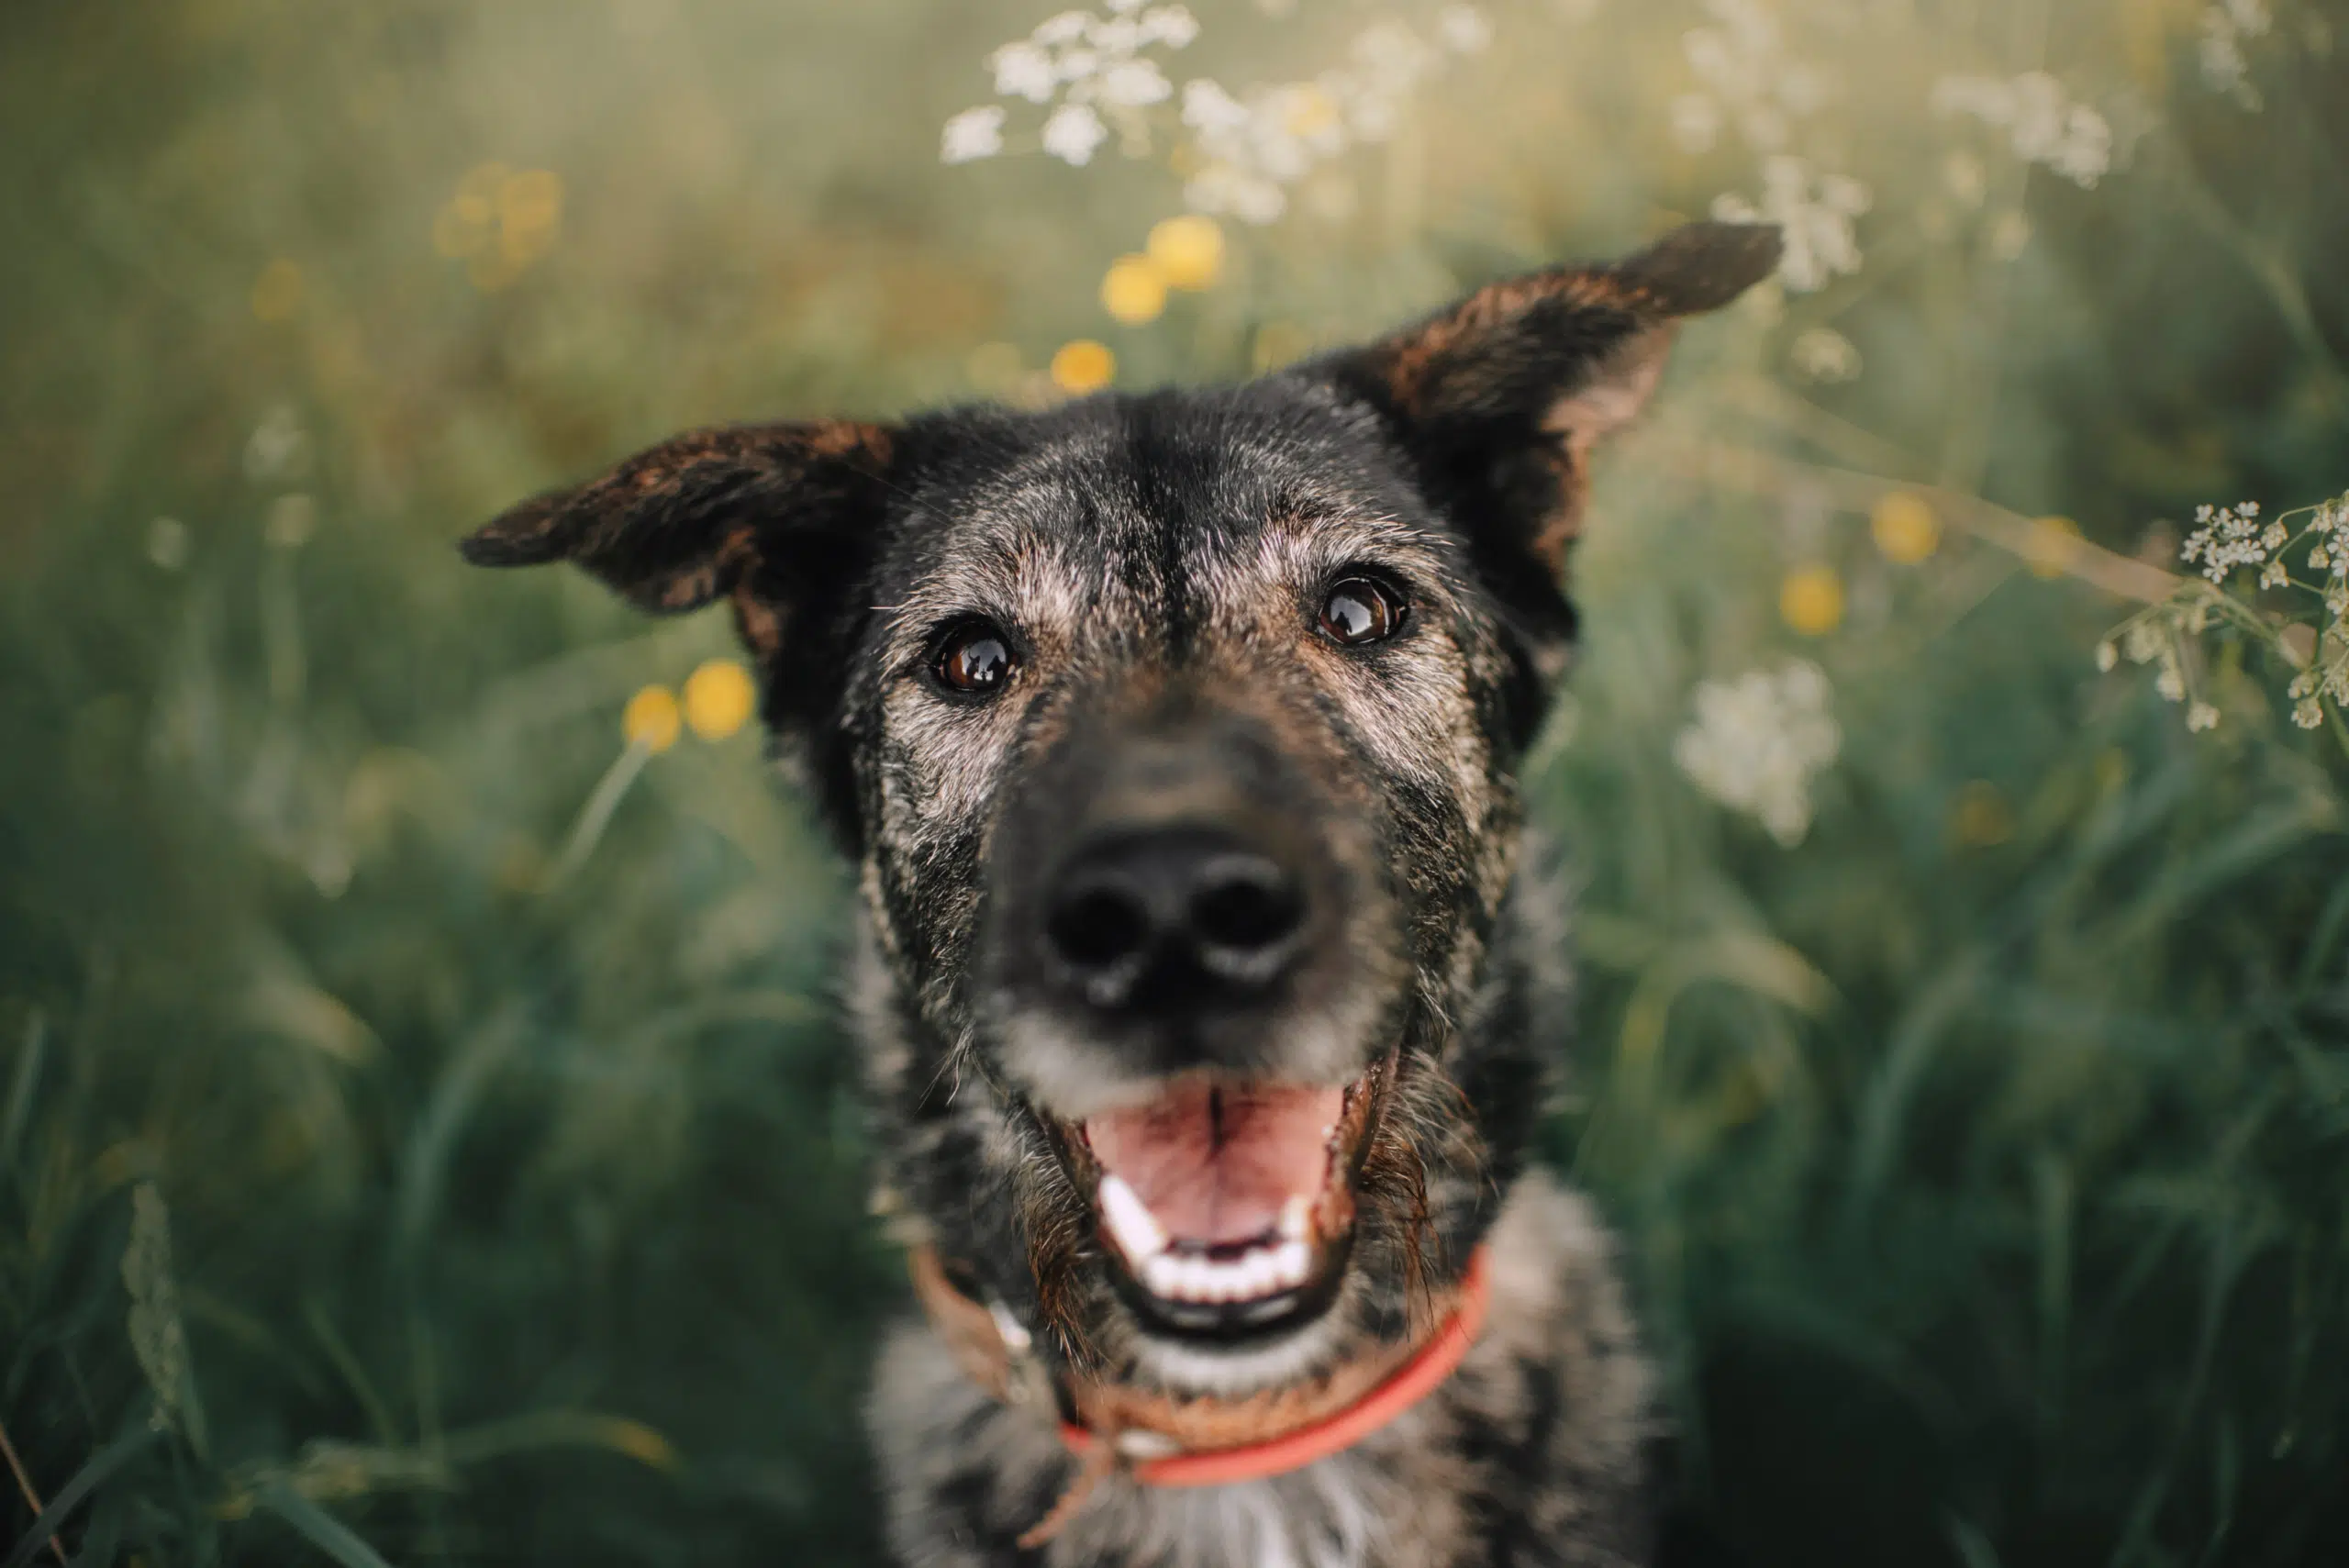 A smiling adult mixed breed dog benefiting from adult dog socialization